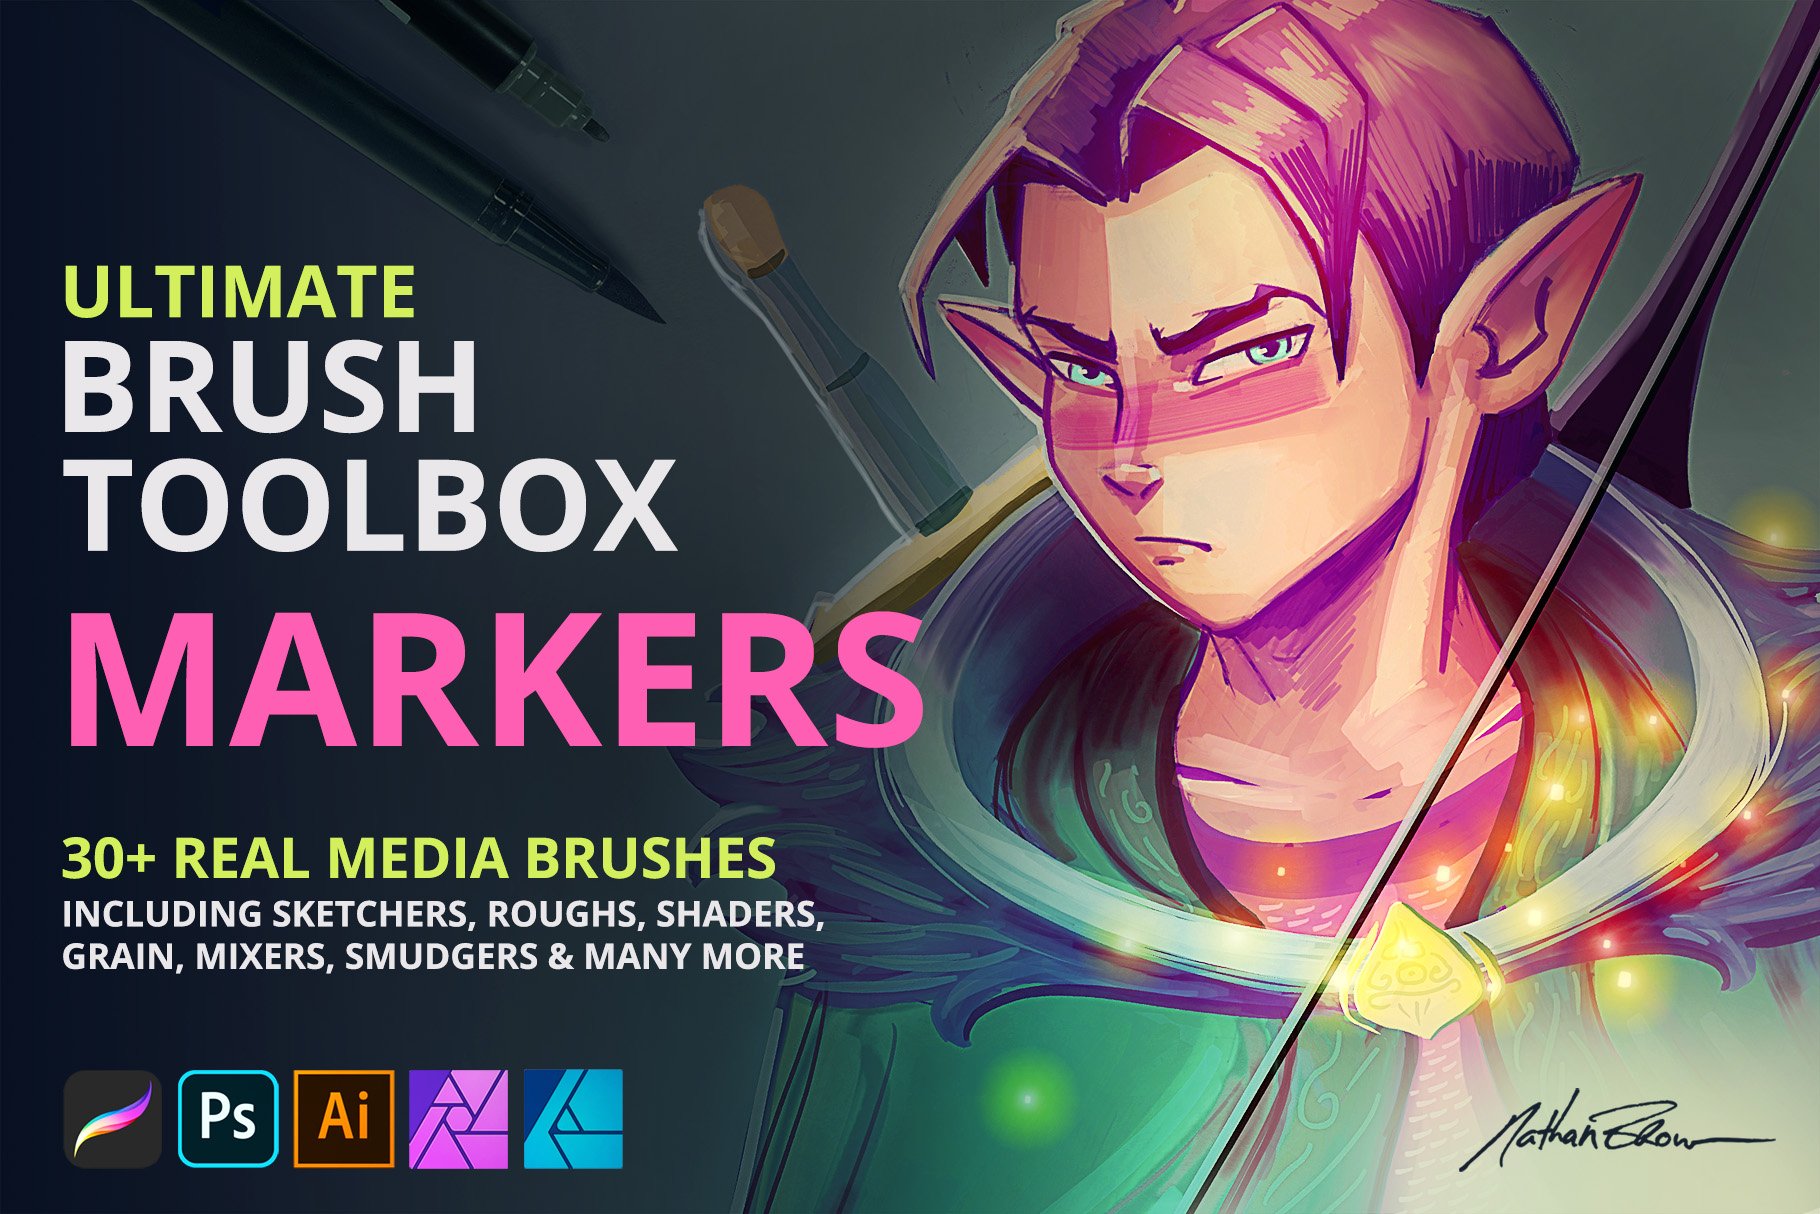 Ultimate Brush Toolbox - Markers